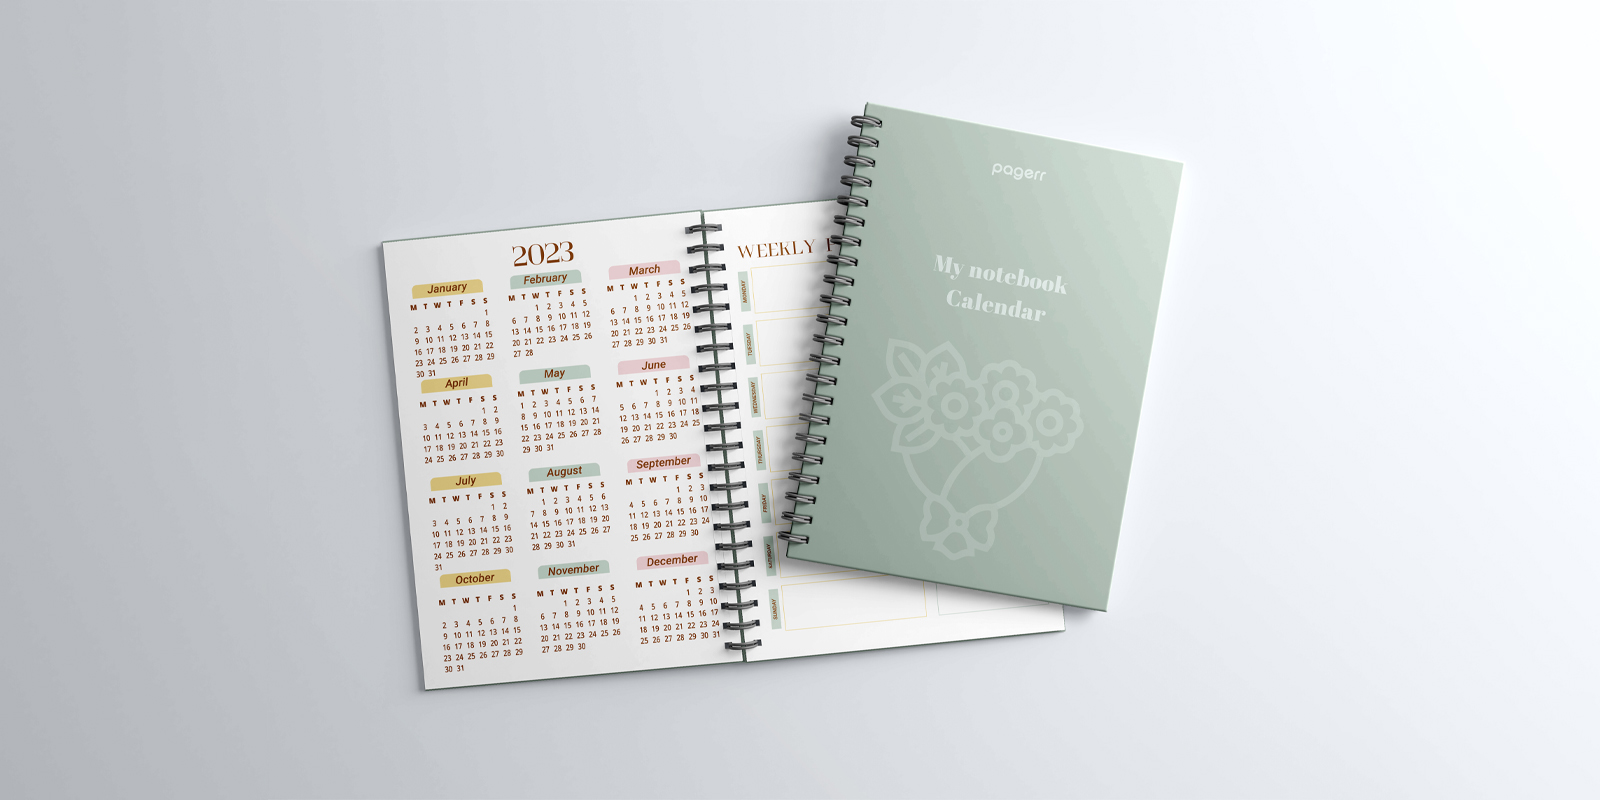 Notebook calendars in Wollongong - Print with Pagerr